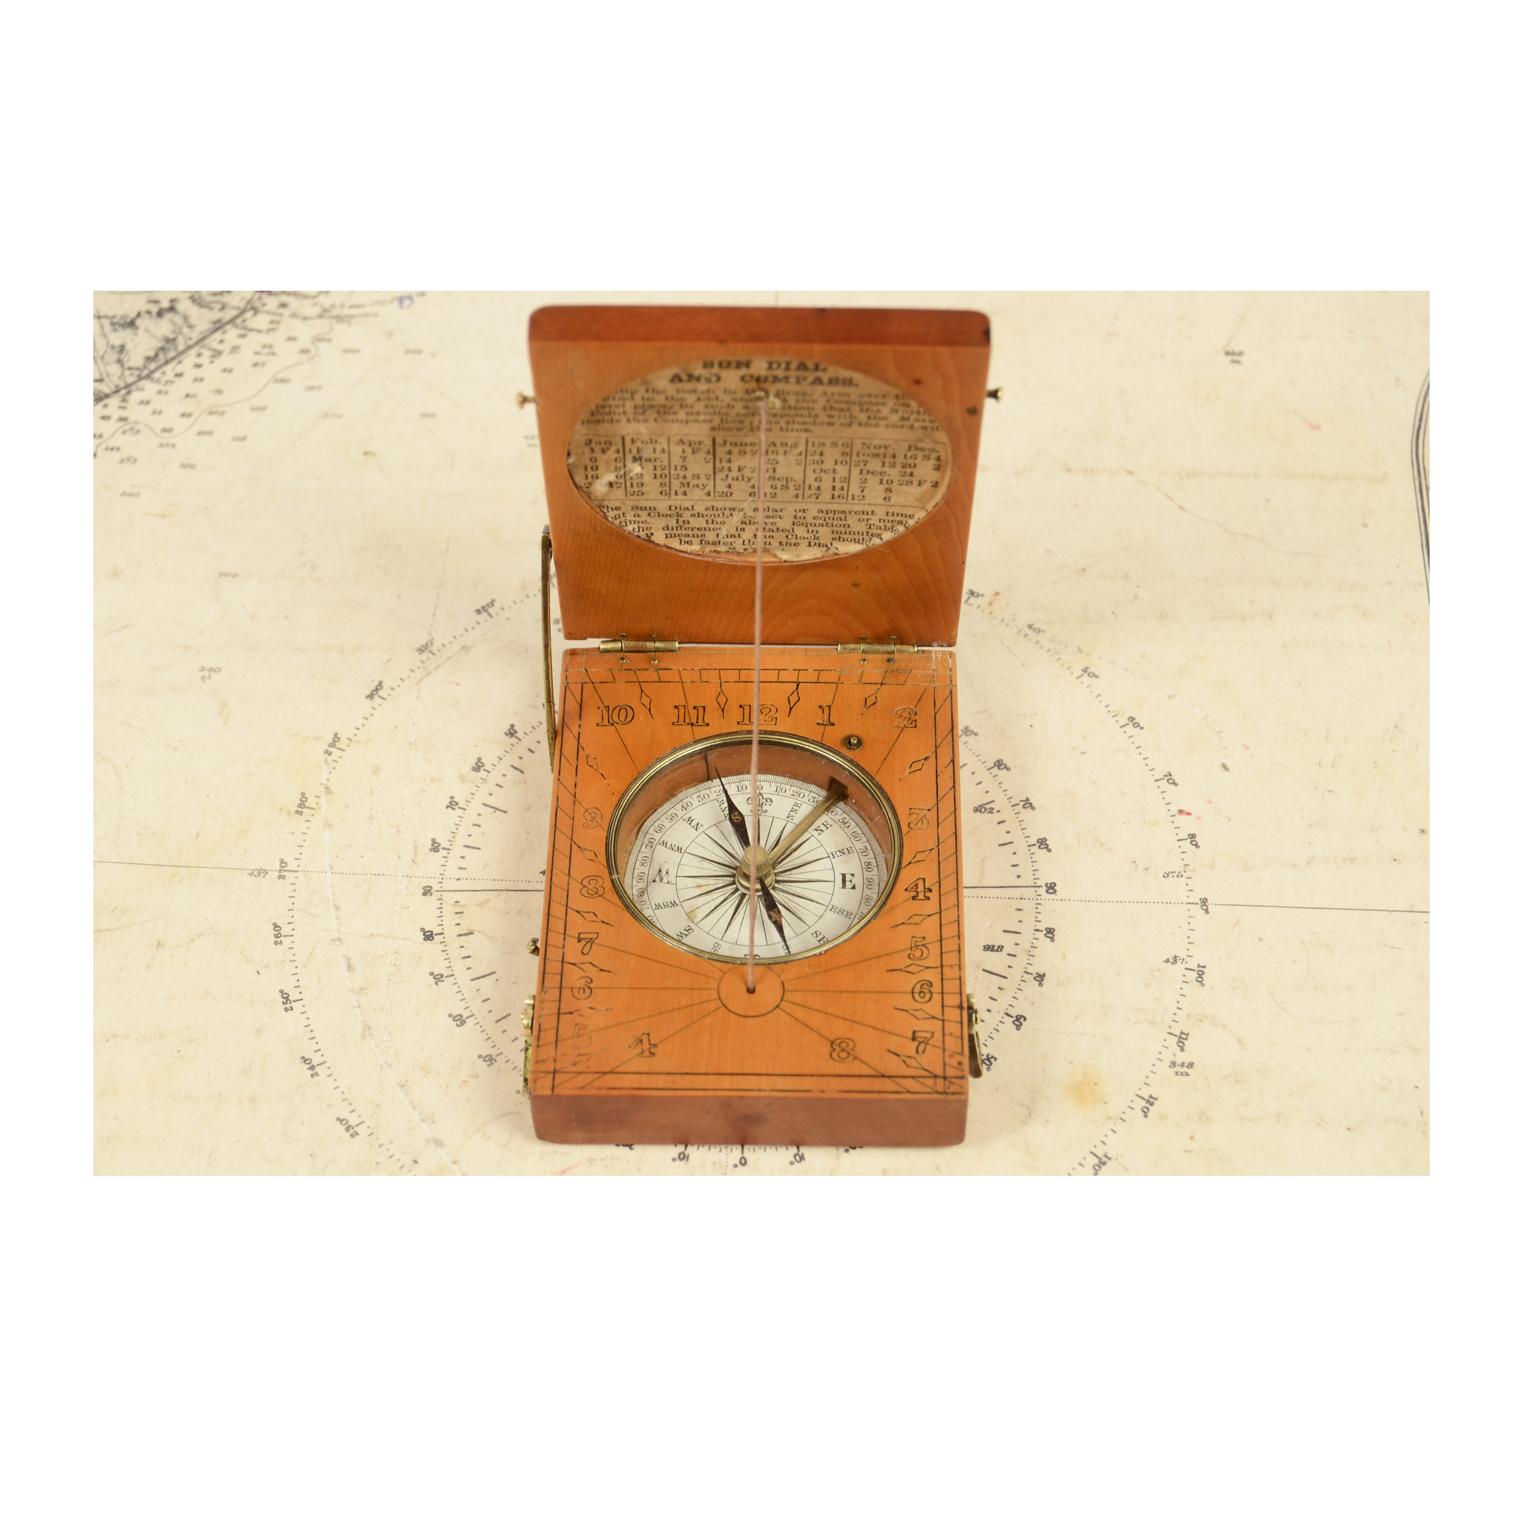 Engraved boxwood diptych sundial with brass hinges, book-shaped, English manufacture, first decade of the 19th century. The sundial is equipped with a compass for orientation inserted in the base with a needle lock and complete with a compass card